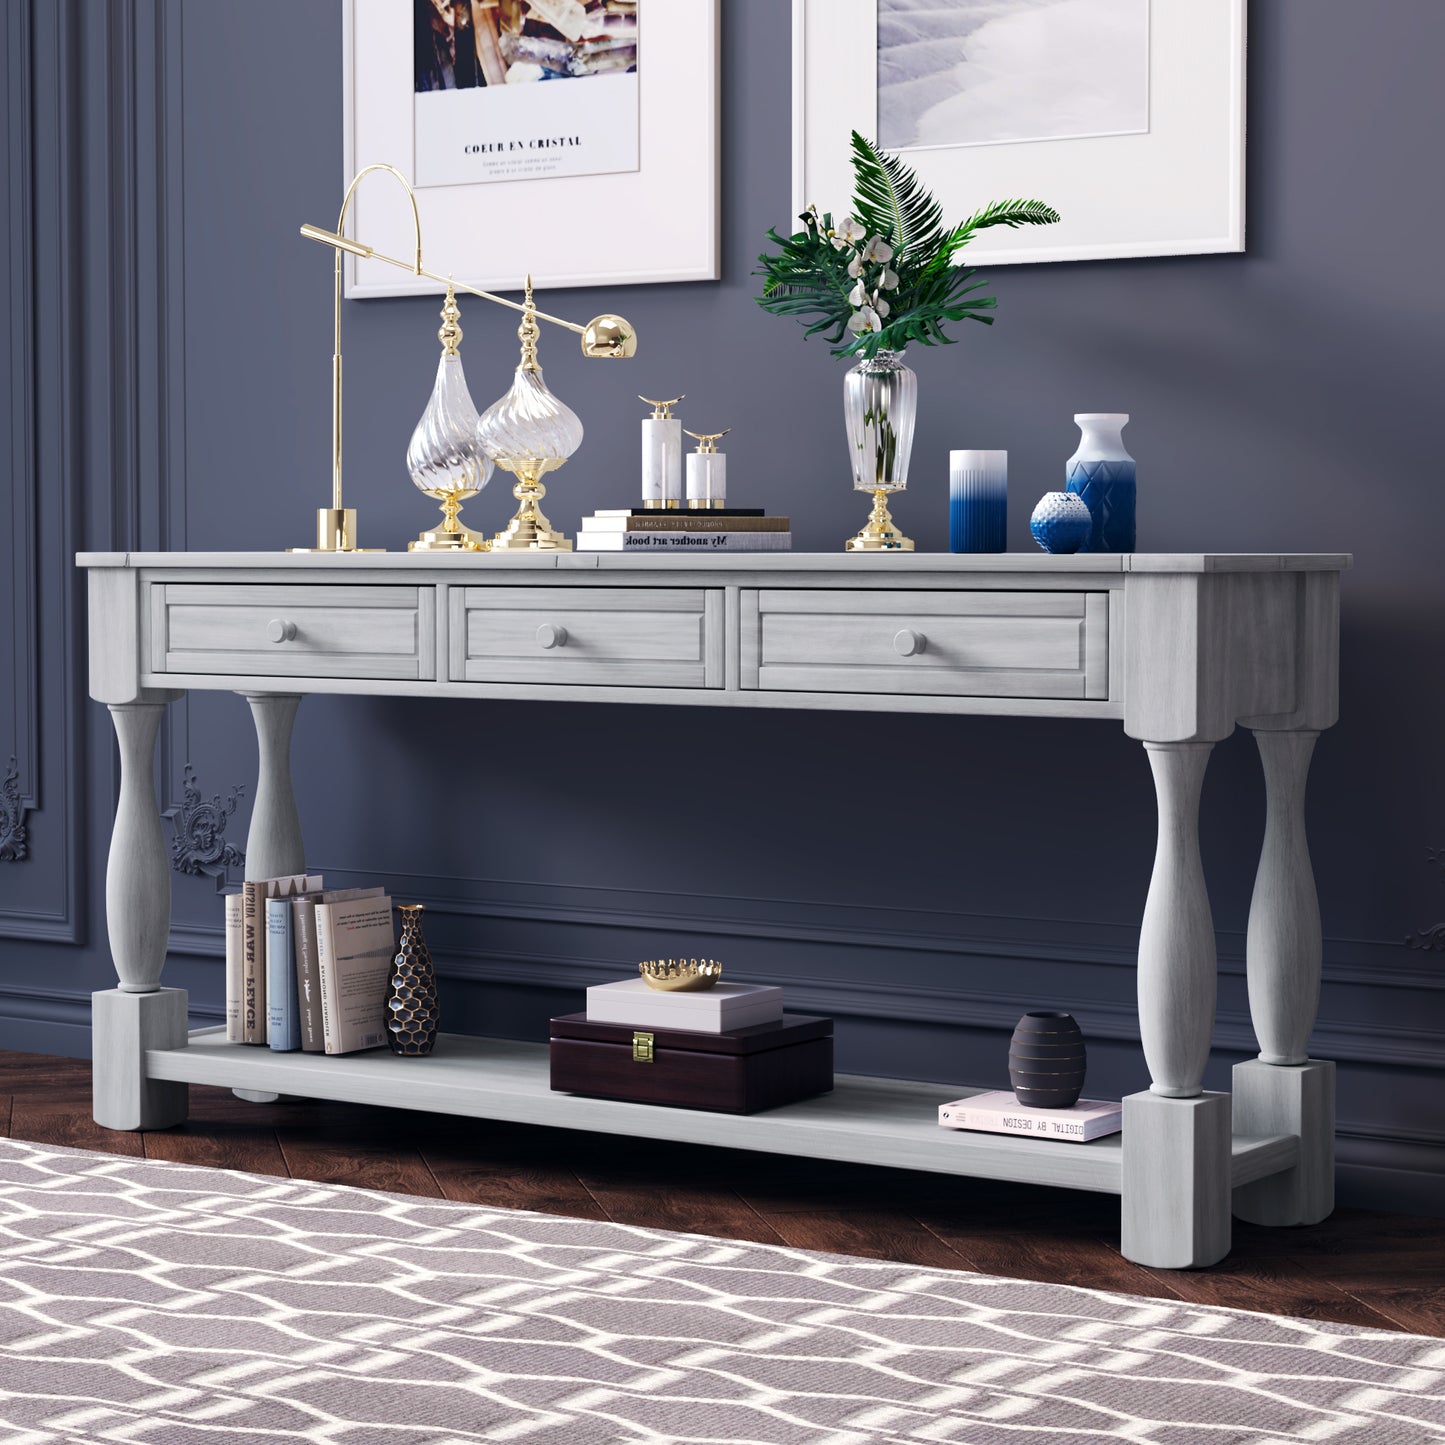 TREXM Console Table 64" Long Extra-thick Sofa Table with Drawers and Shelf for Entryway, Hallway, Living Room (Gray)